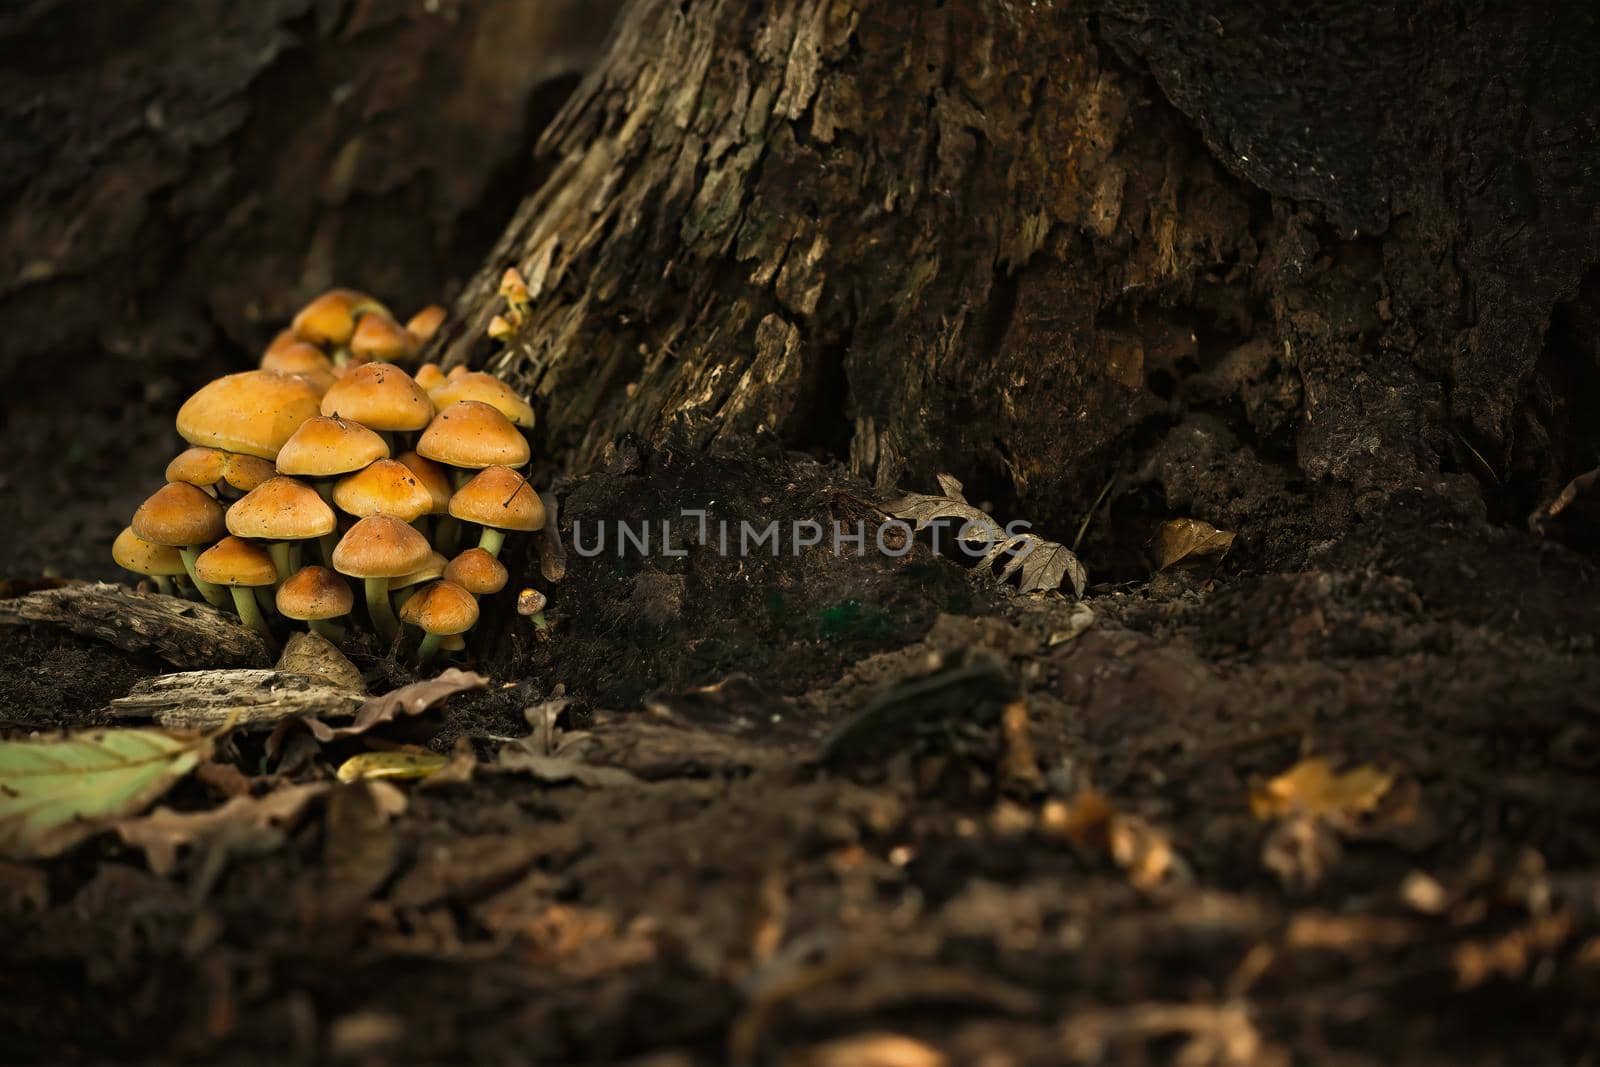 Inedible poisonous mushrooms in the forest near the trunk of an old dead tree. A picture in a mystical mood